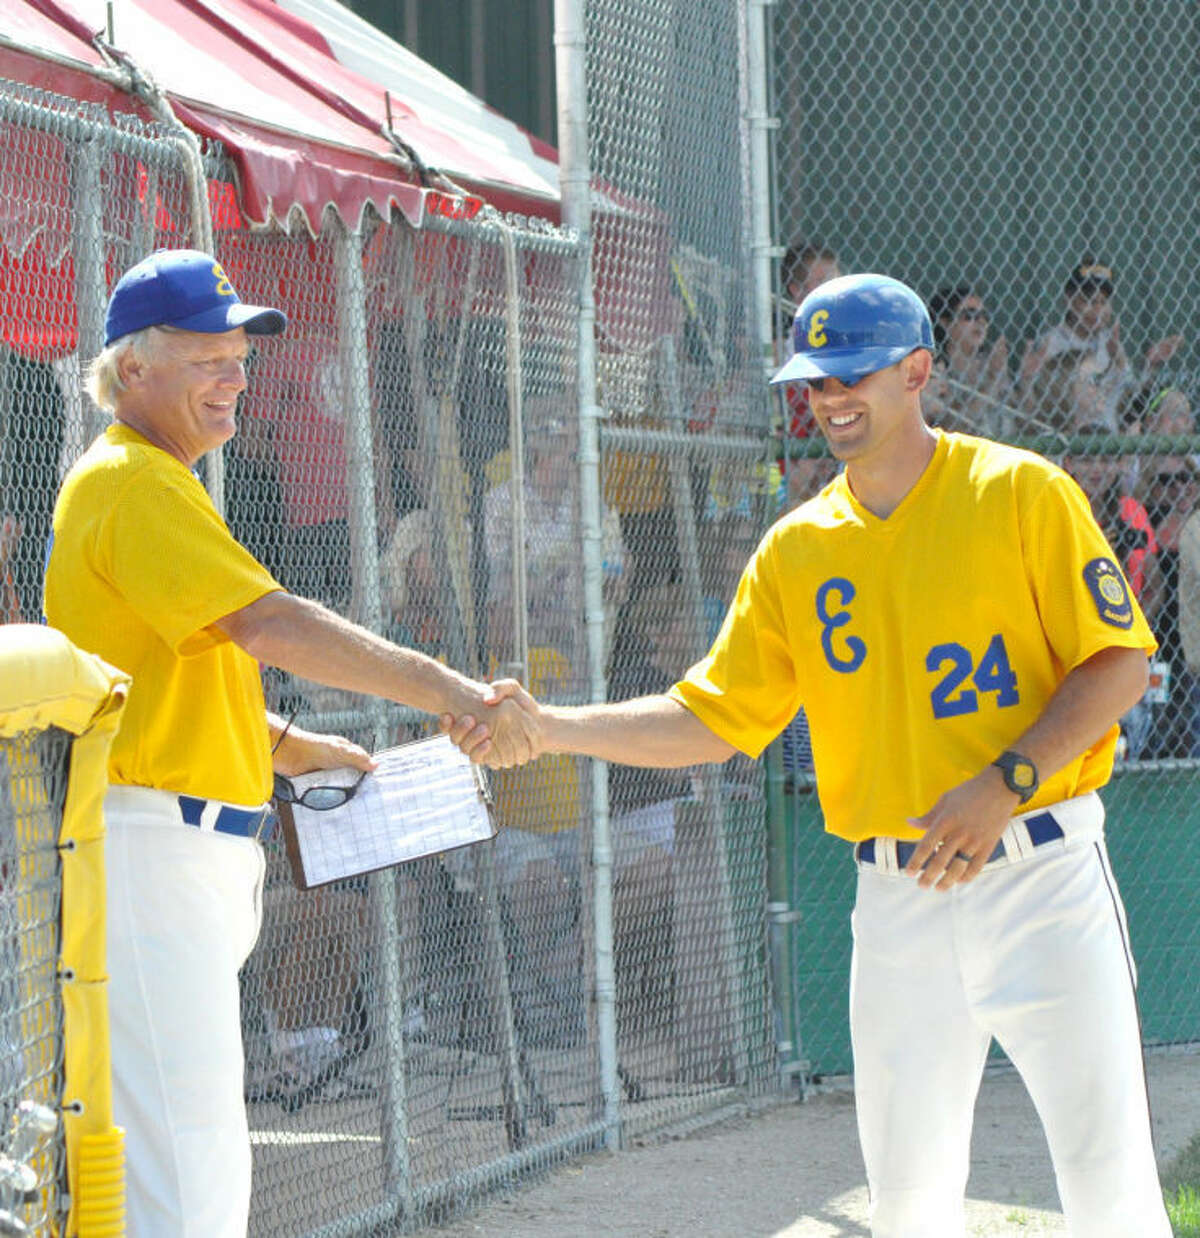 Post 199 head coach Ken Schaake, left, is all smiles while shaking hands with first base coach Jake Schaake, right, following the win over Moline. Ken Schaake is drenched in water from taking a cooler bath provided by Post 199’s Devin Breihan.